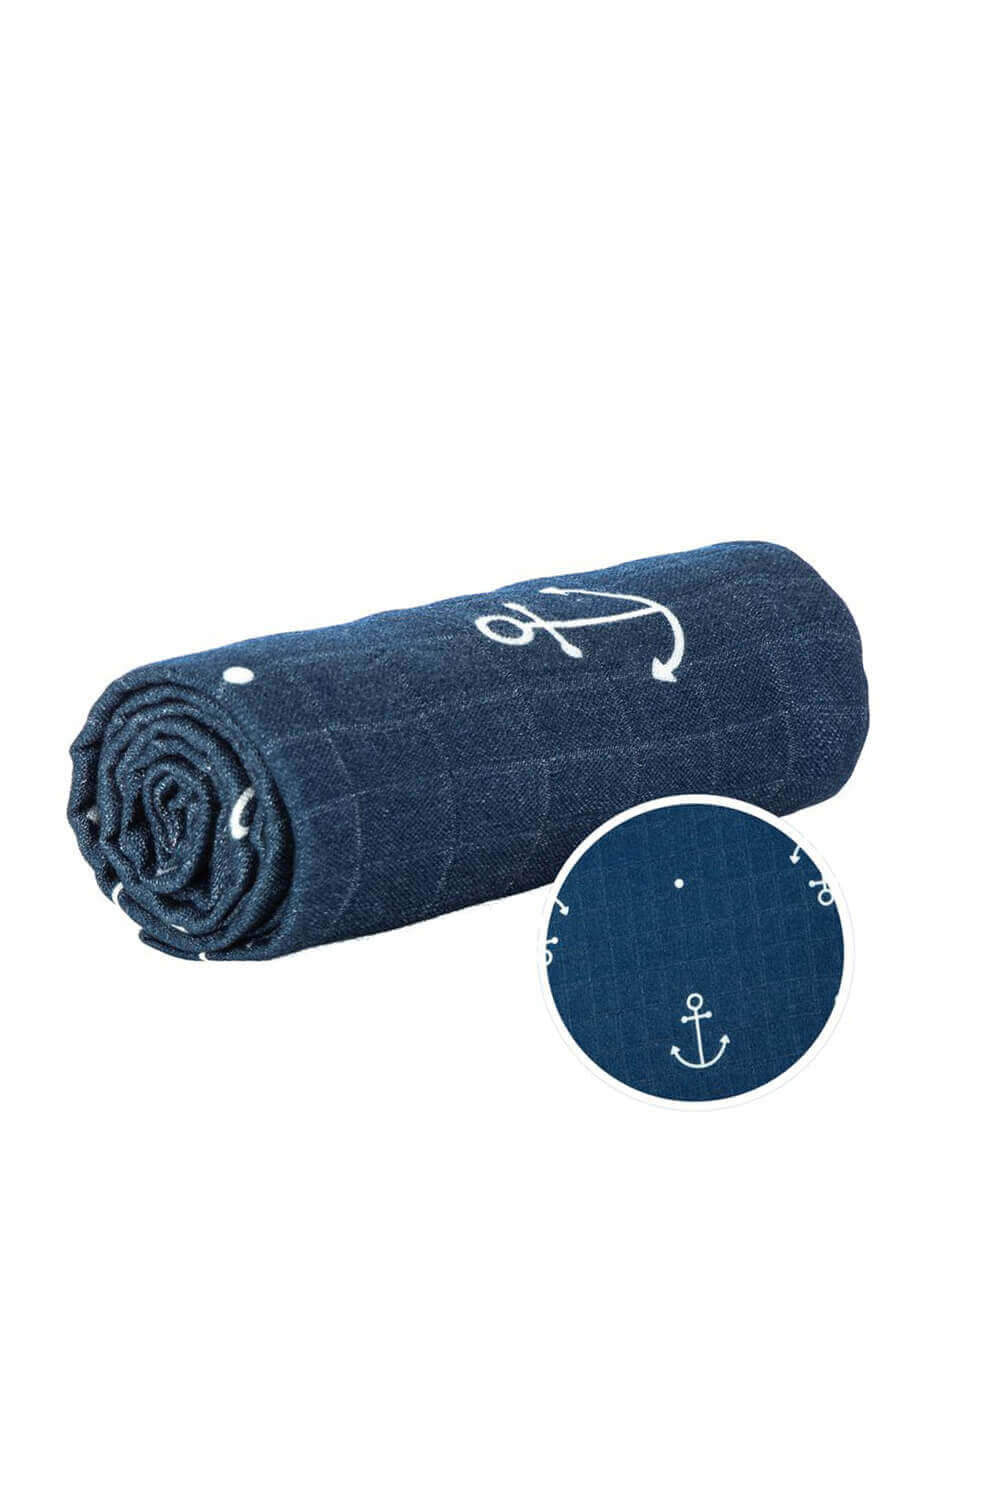 Anchors Aweigh - Blanket